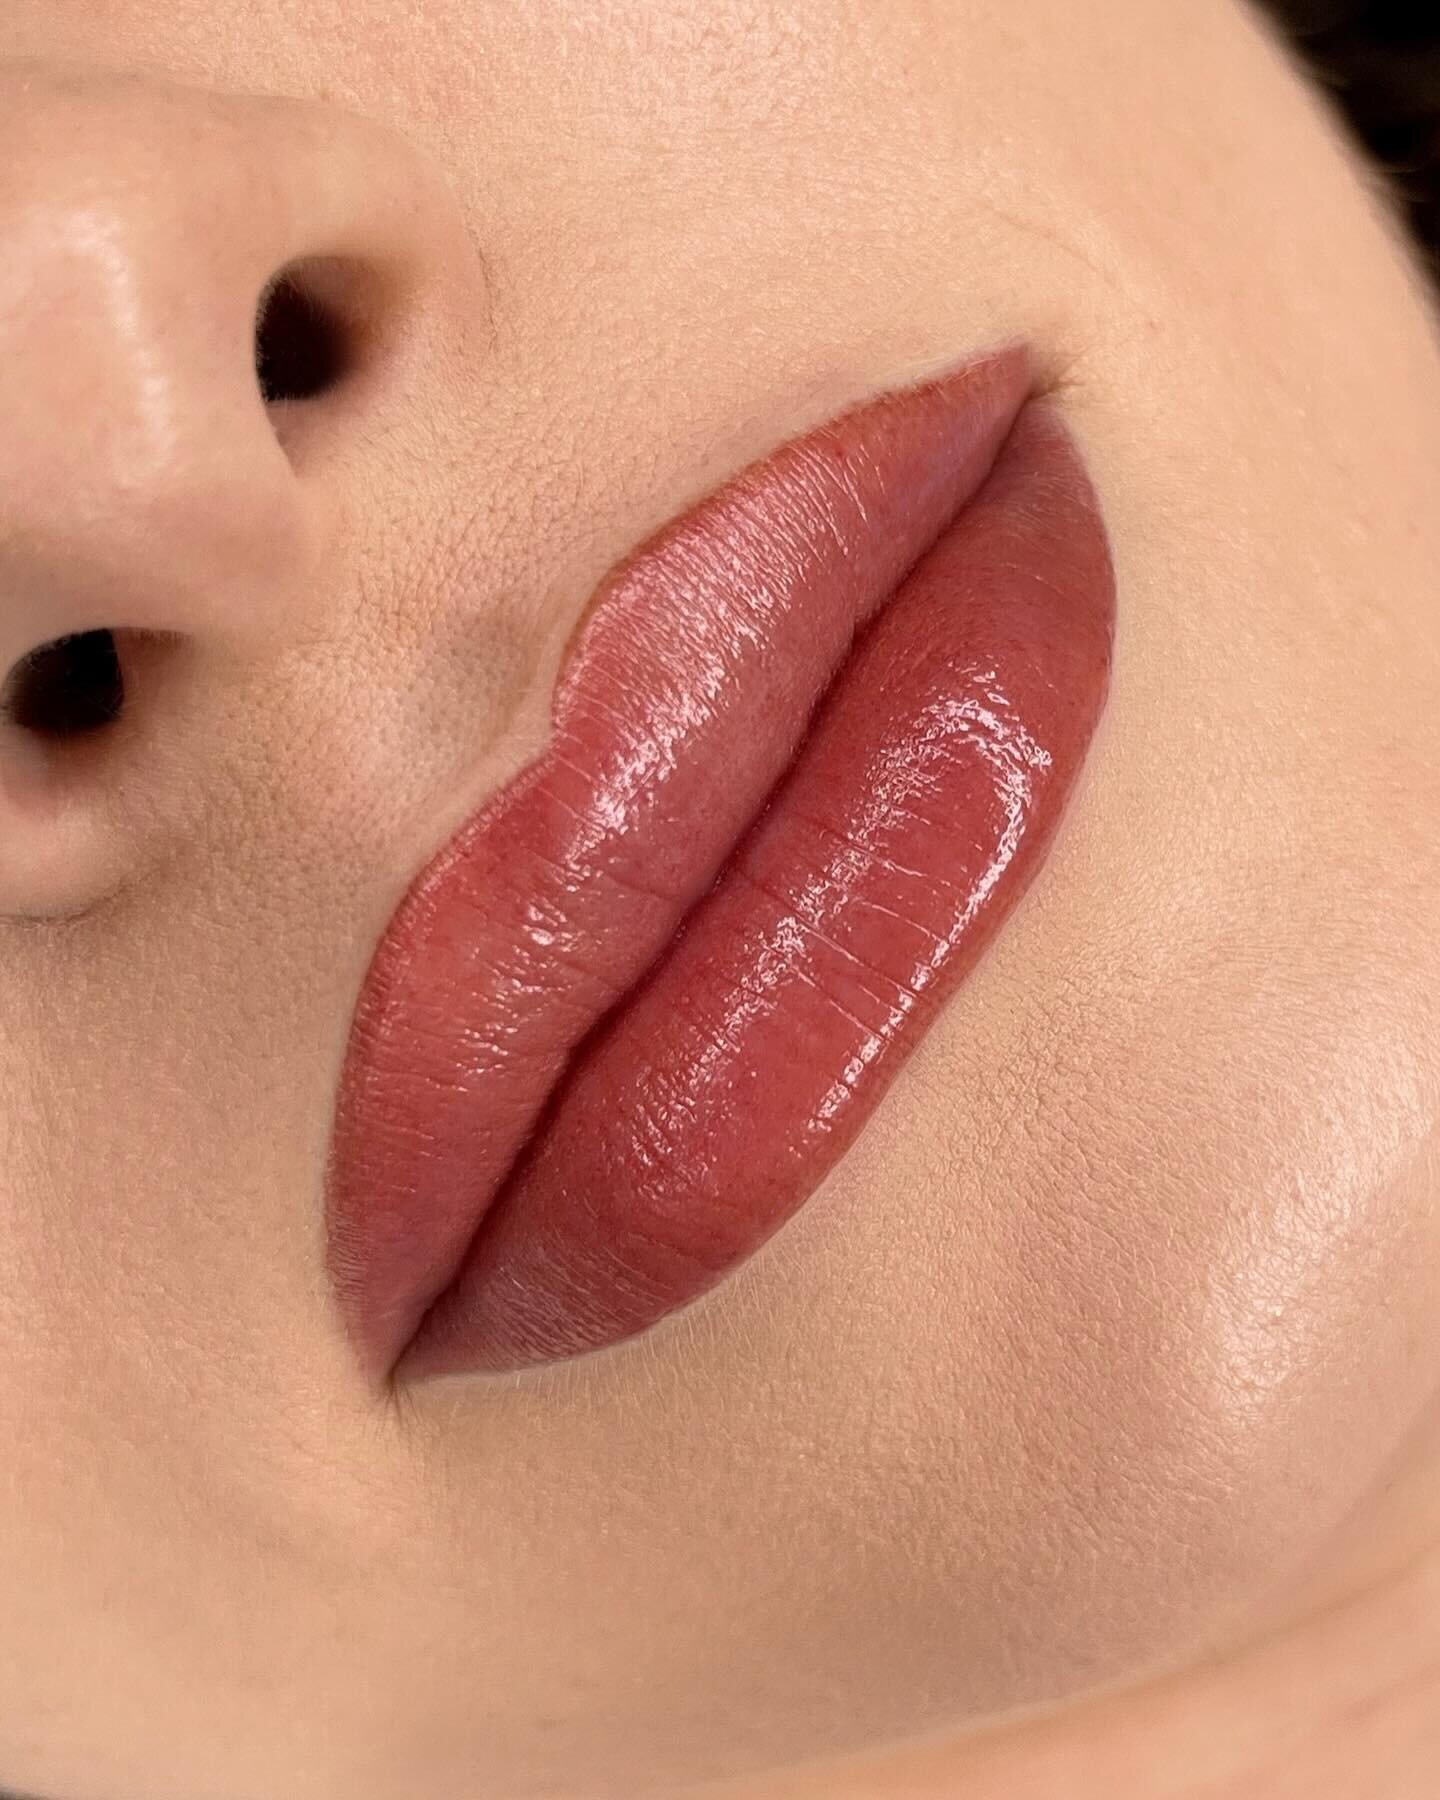 Embrace the beauty of a natural lip blush cosmetic tattoo procedure. Say goodbye to constant lipstick touch-ups and smudging. 

Enhance your lips with a subtle, long-lasting tint that complements your unique style, allowing you to confidently conquer